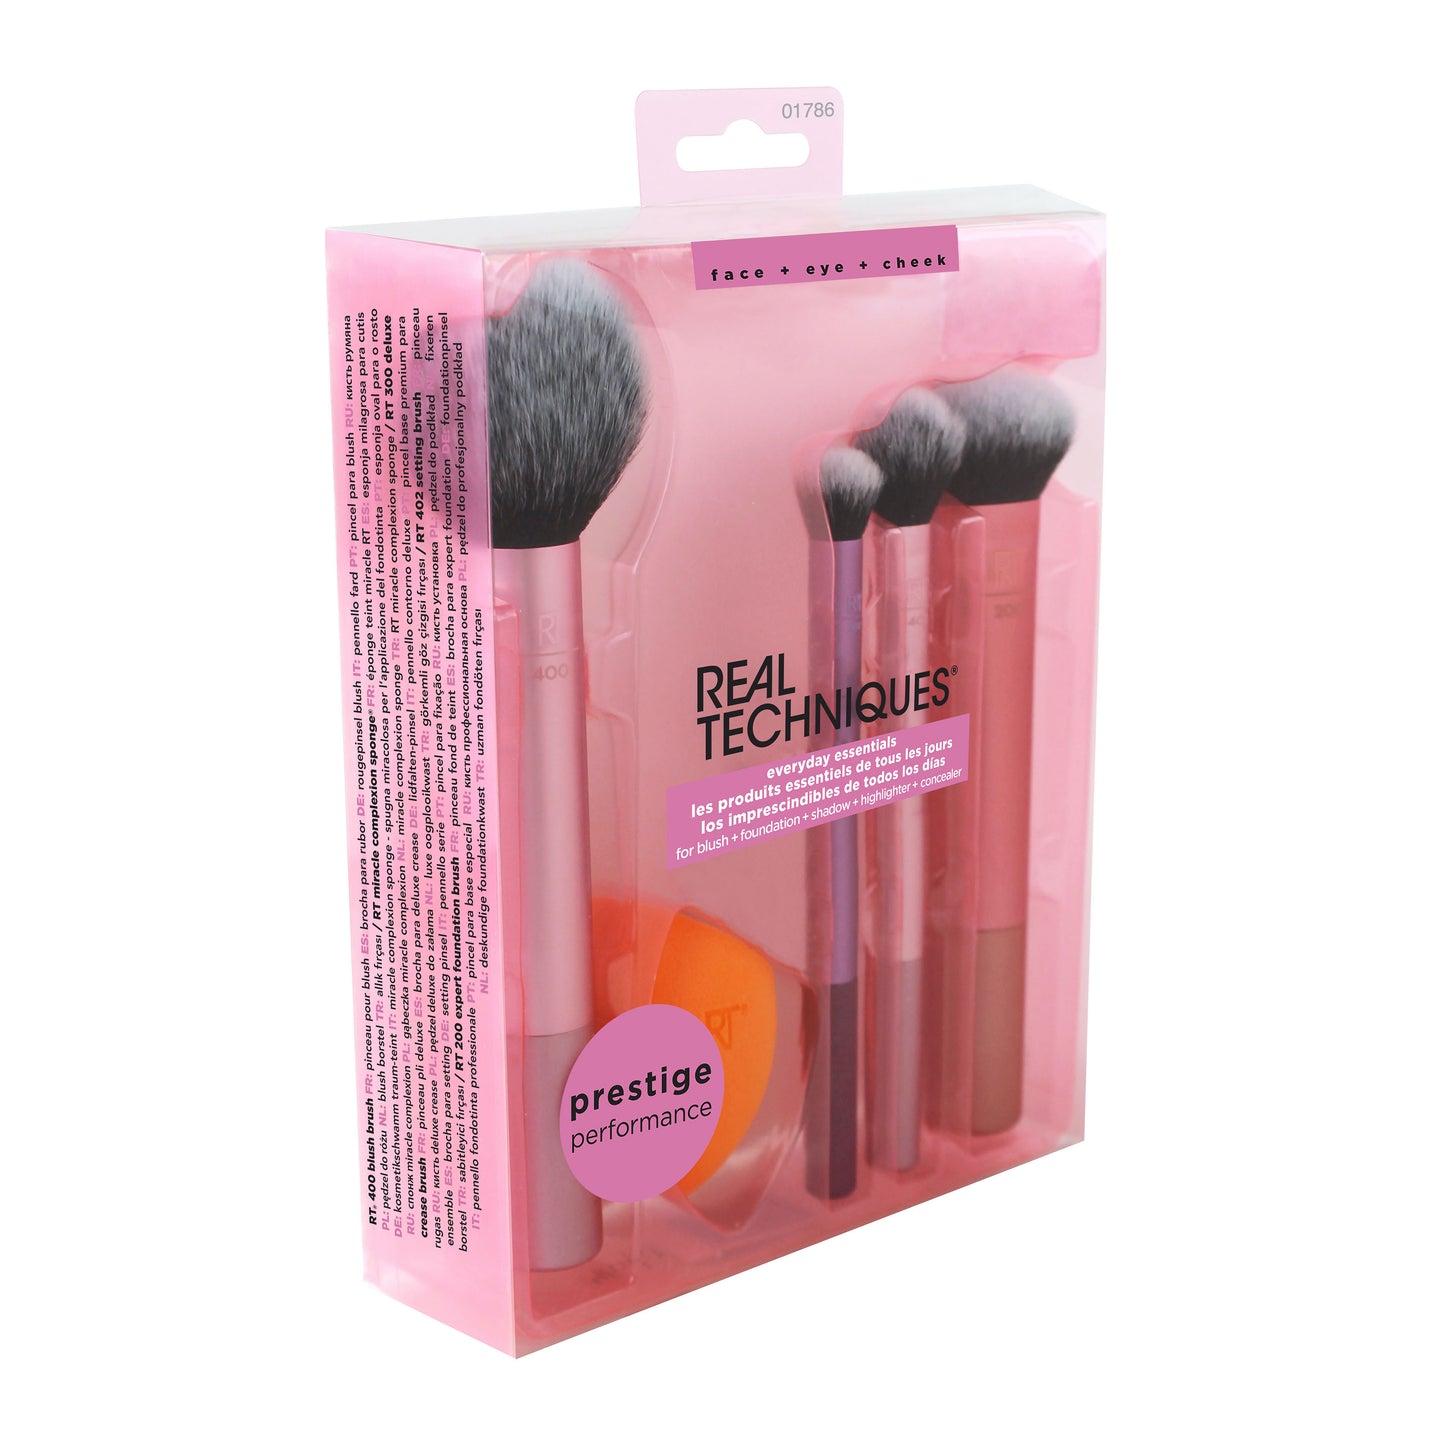 Techniques Everyday Essentials Make-up Brush Complete Face Set (M – Beauty Goddess